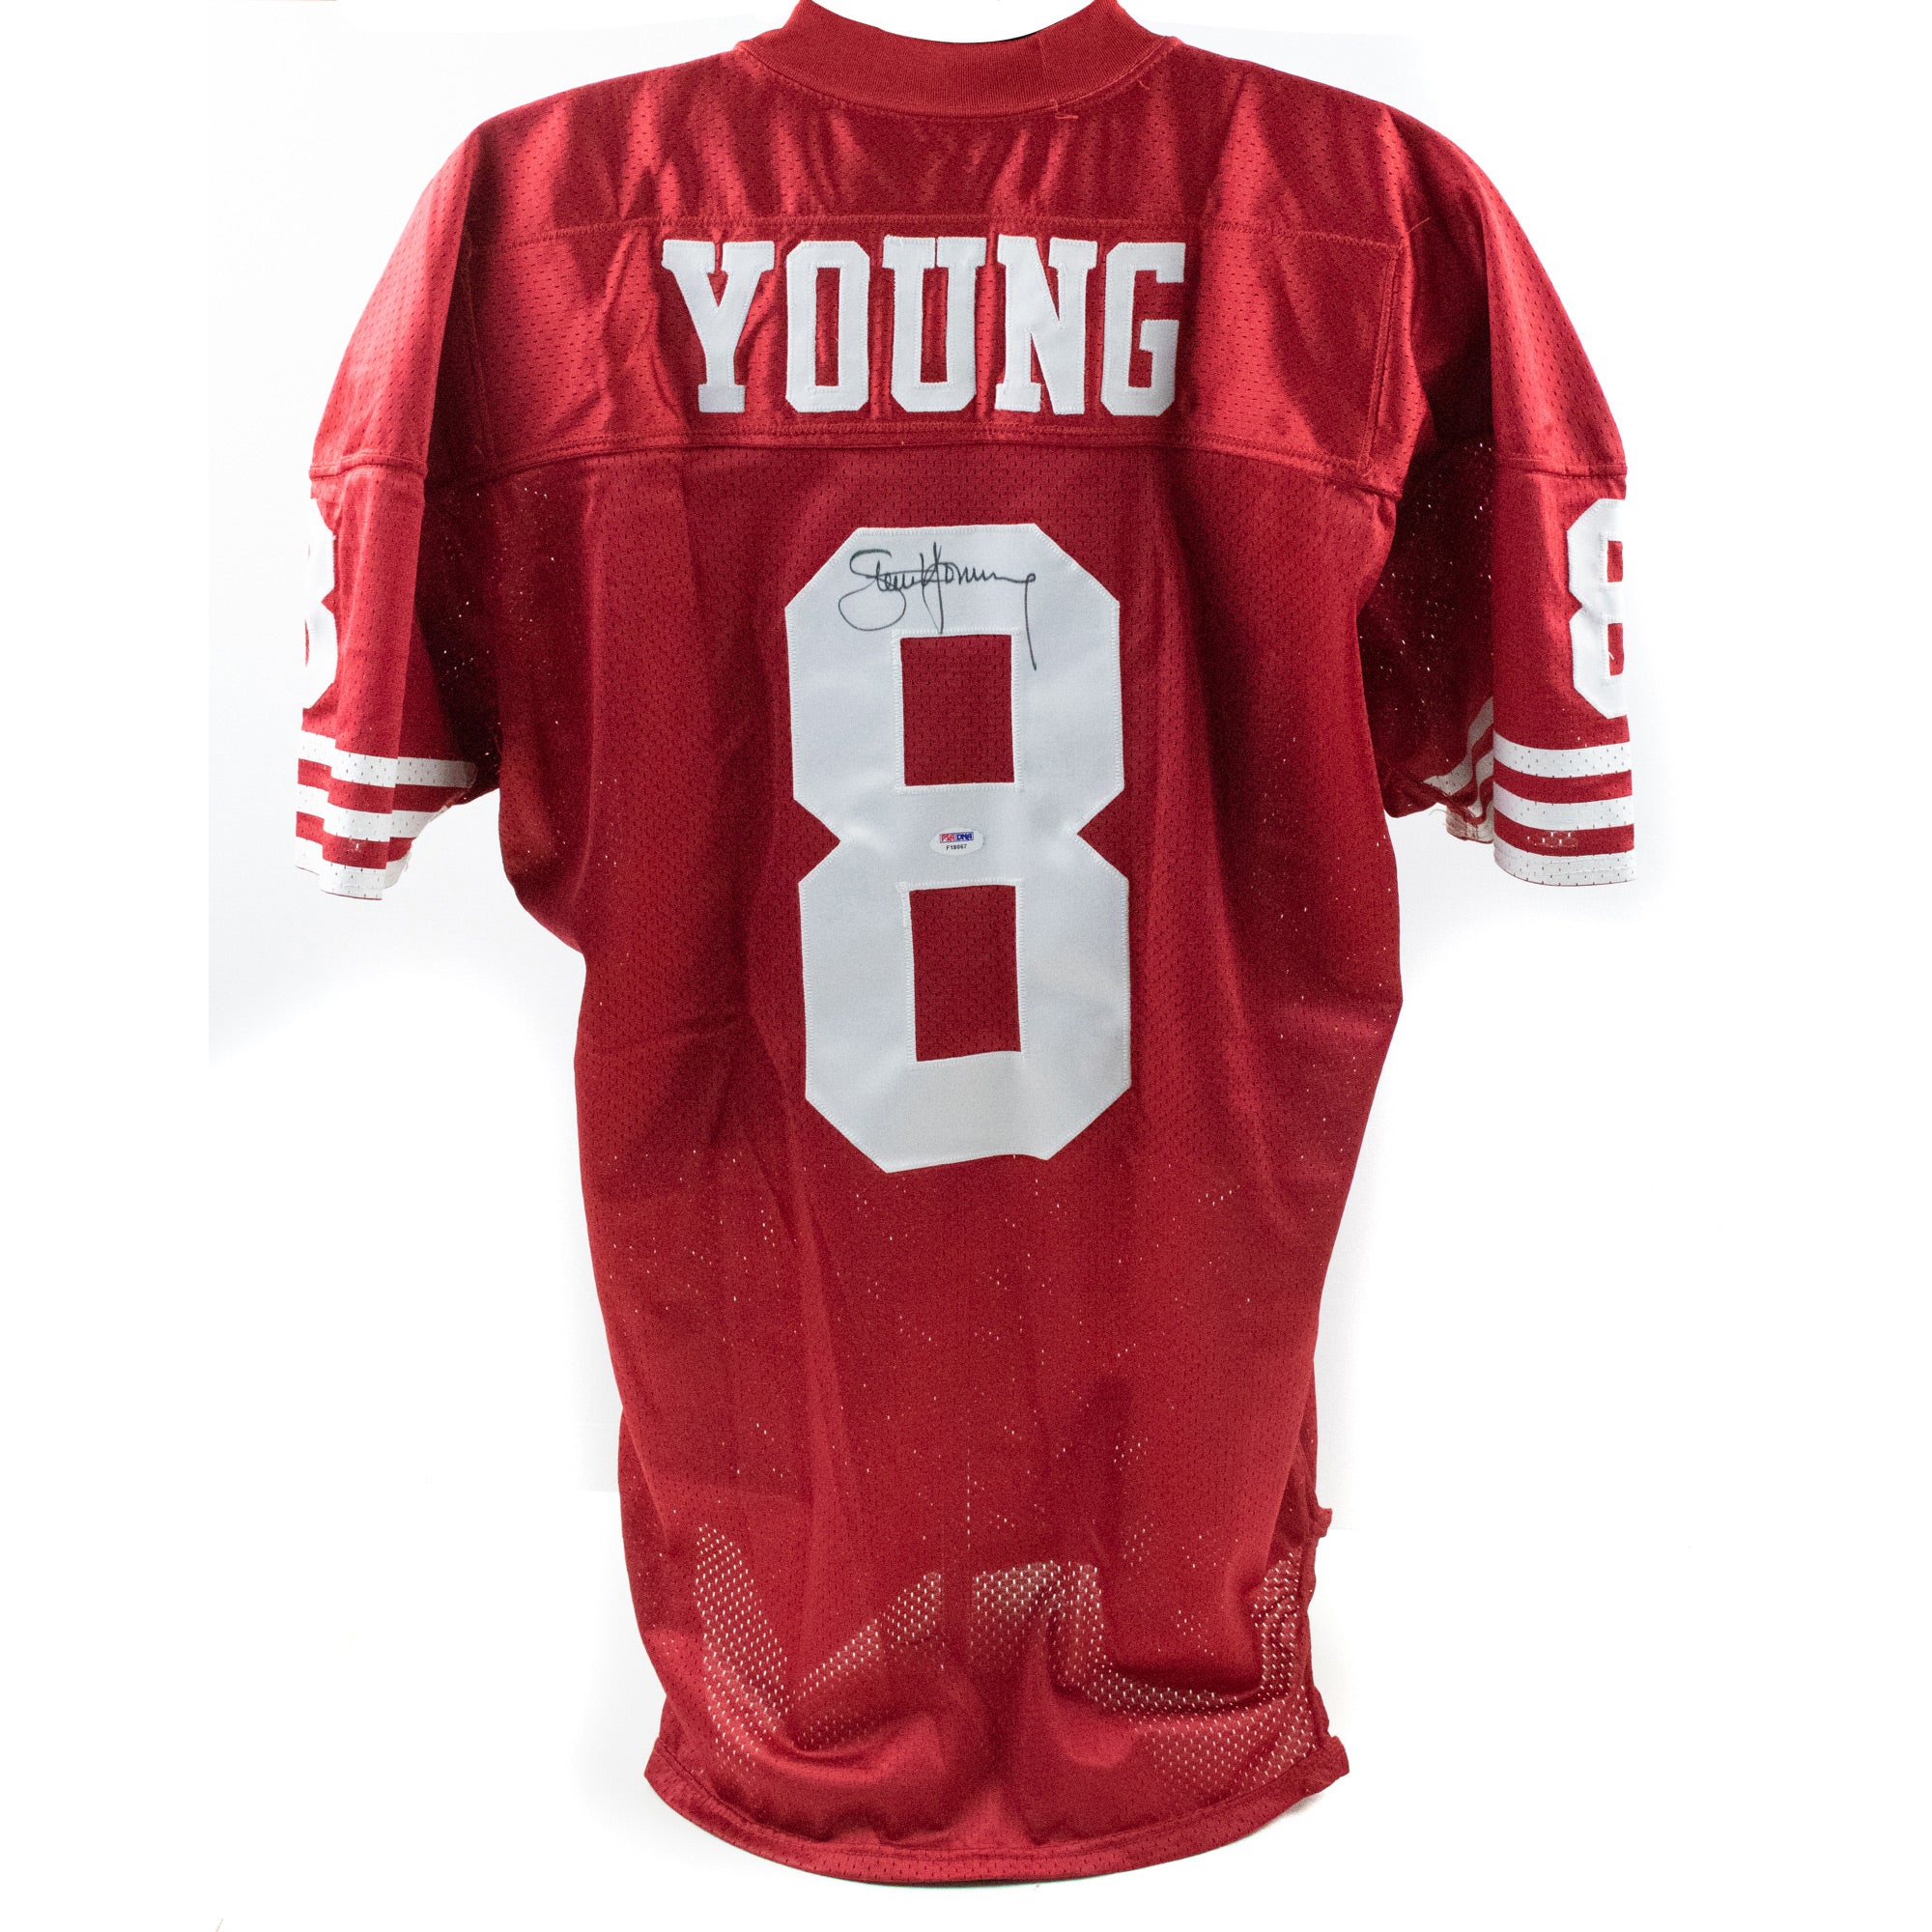 Steve Young 1995 Game Worn Jersey